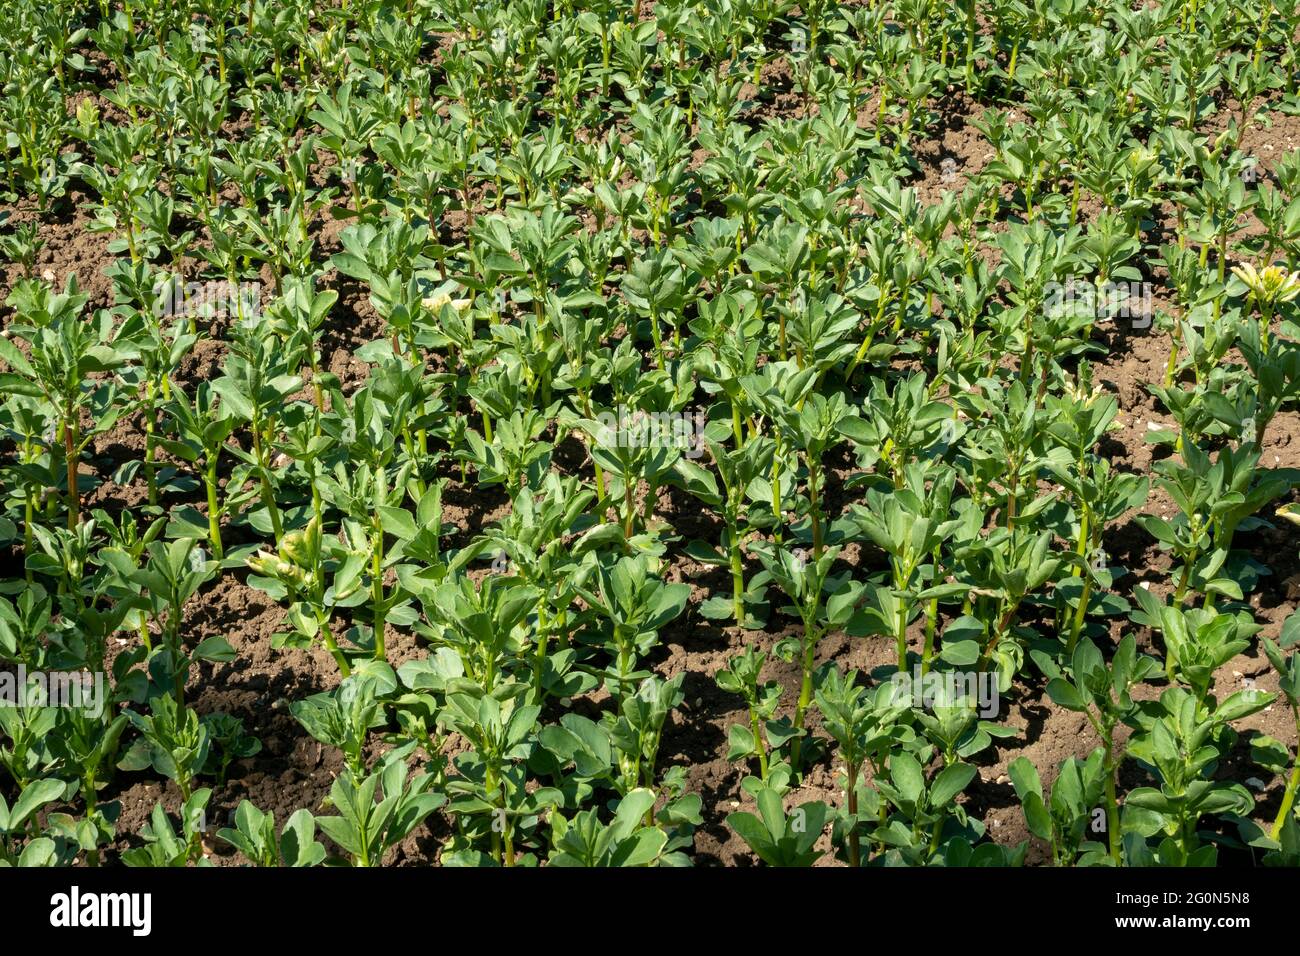 An area of a field crop of young broad bean plants Stock Photo